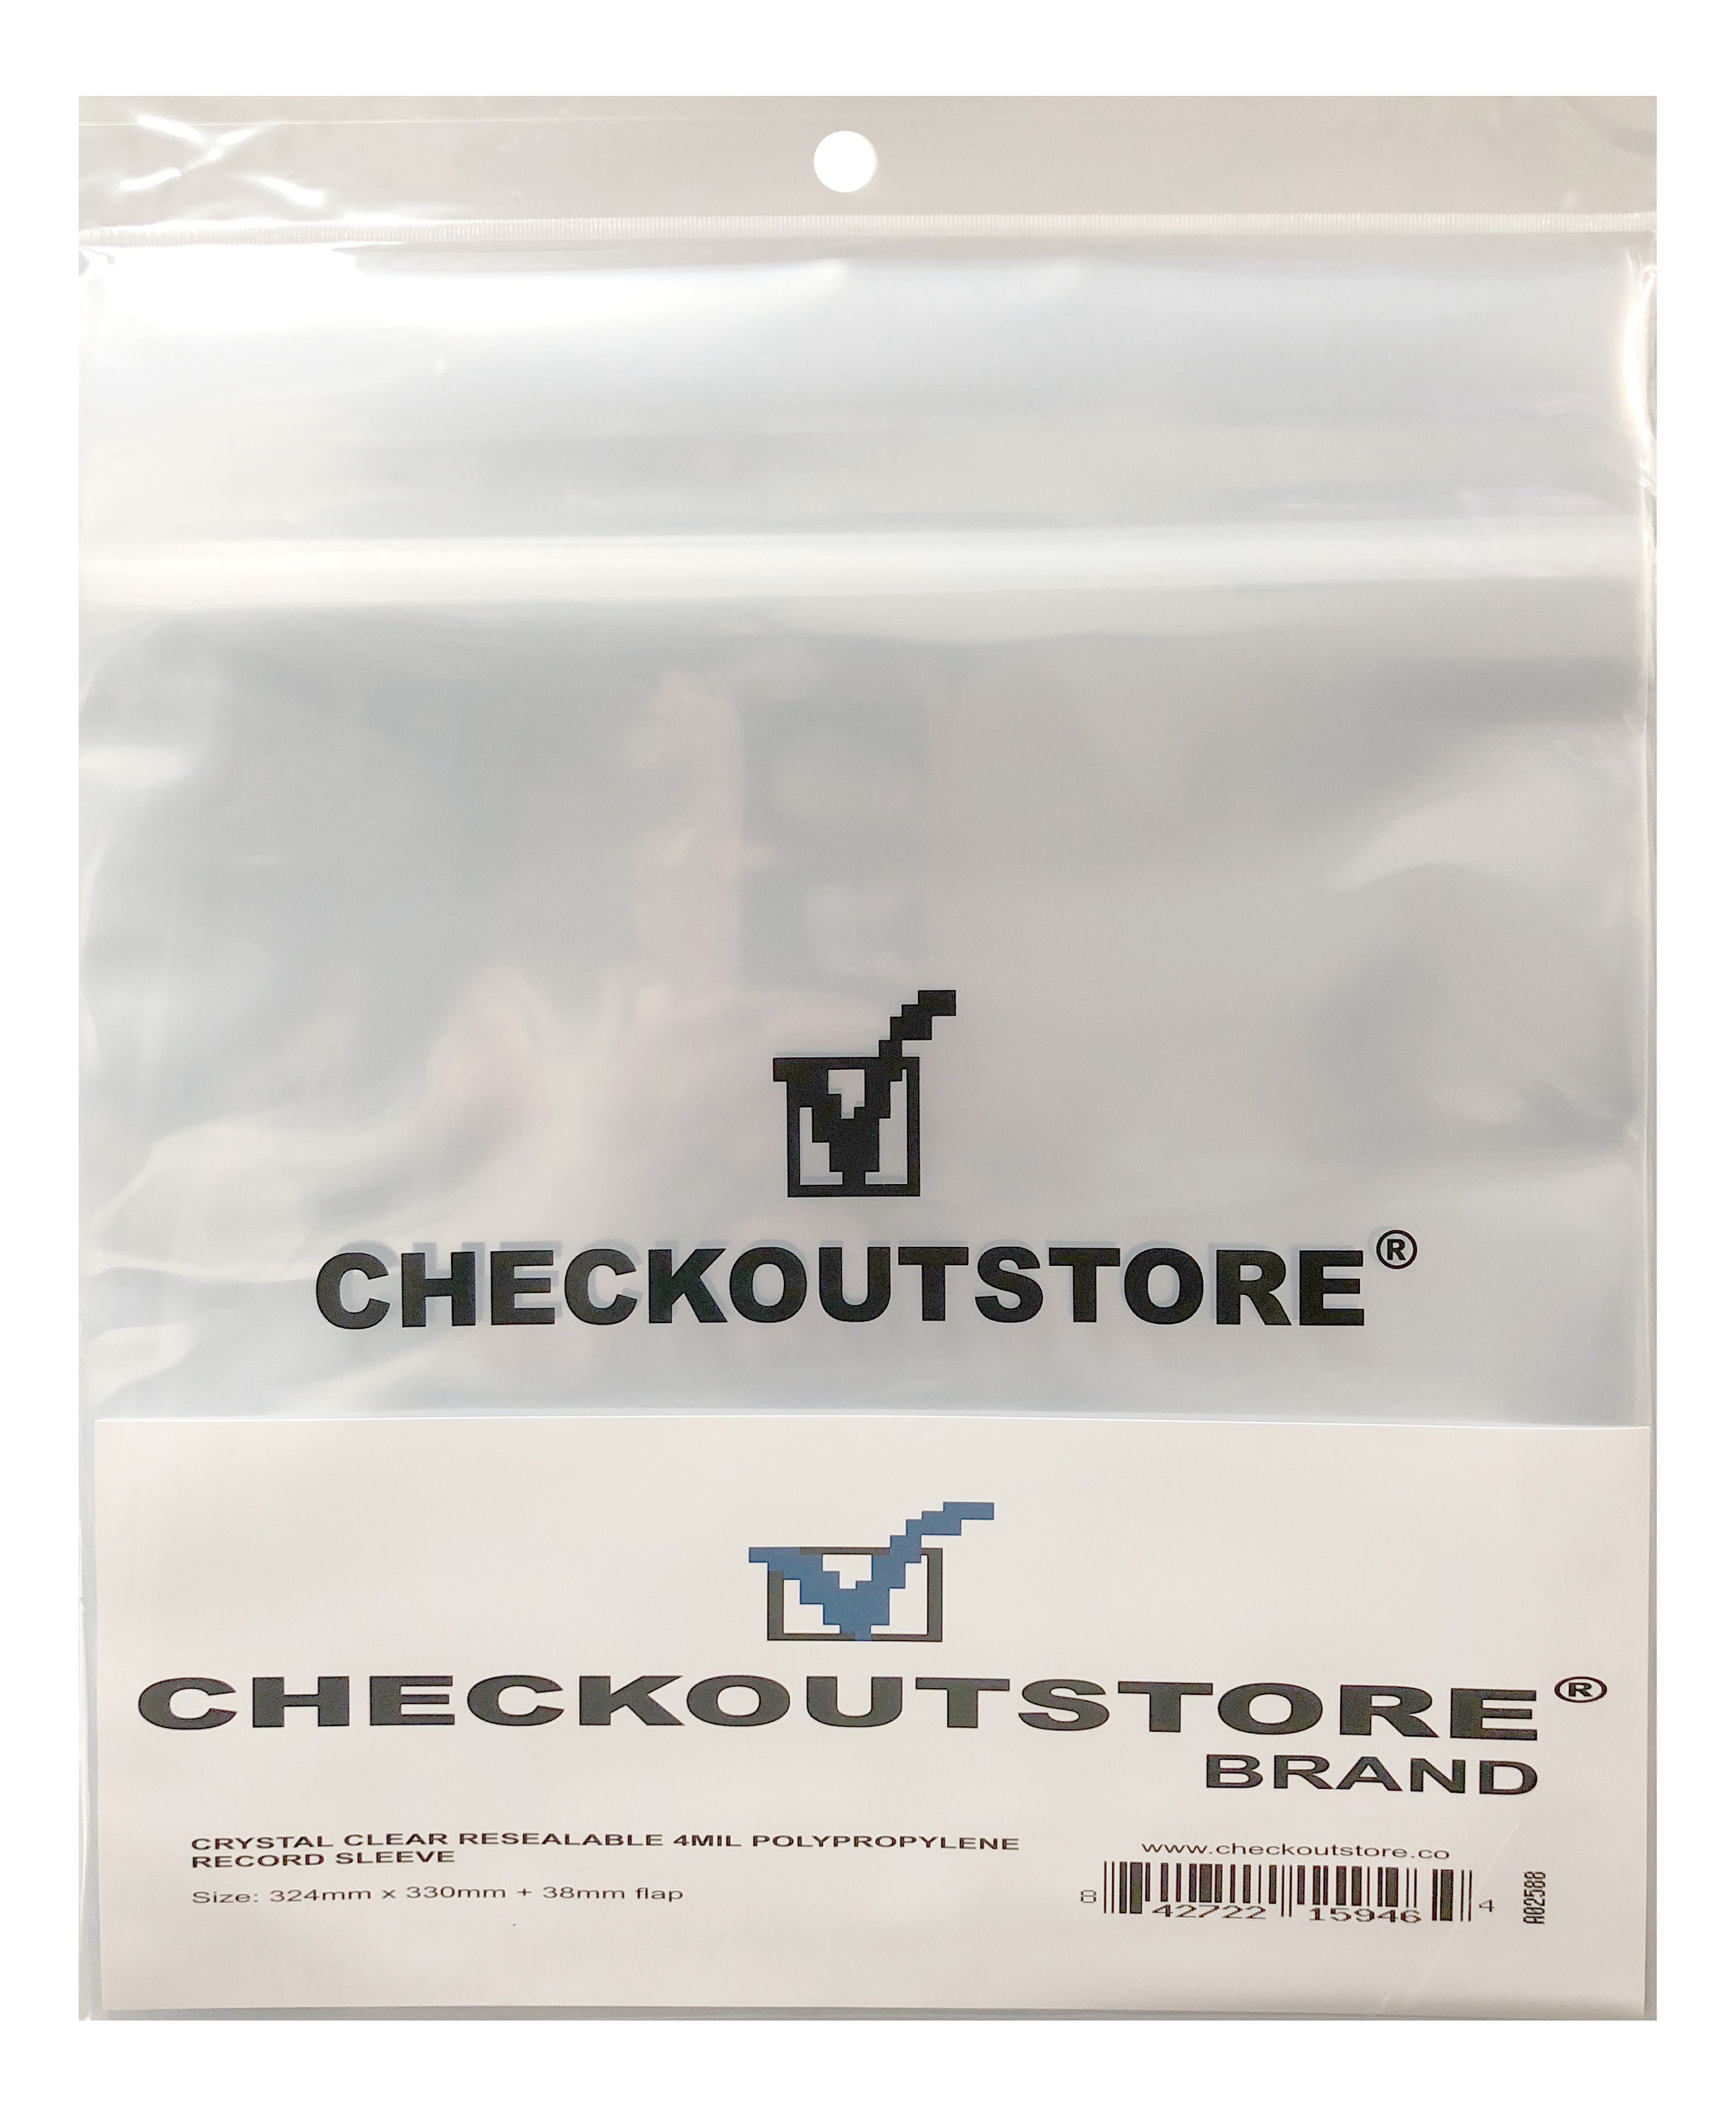 Checkoutstore Crystal Clear Plastic OPP With Sealable Flap for 